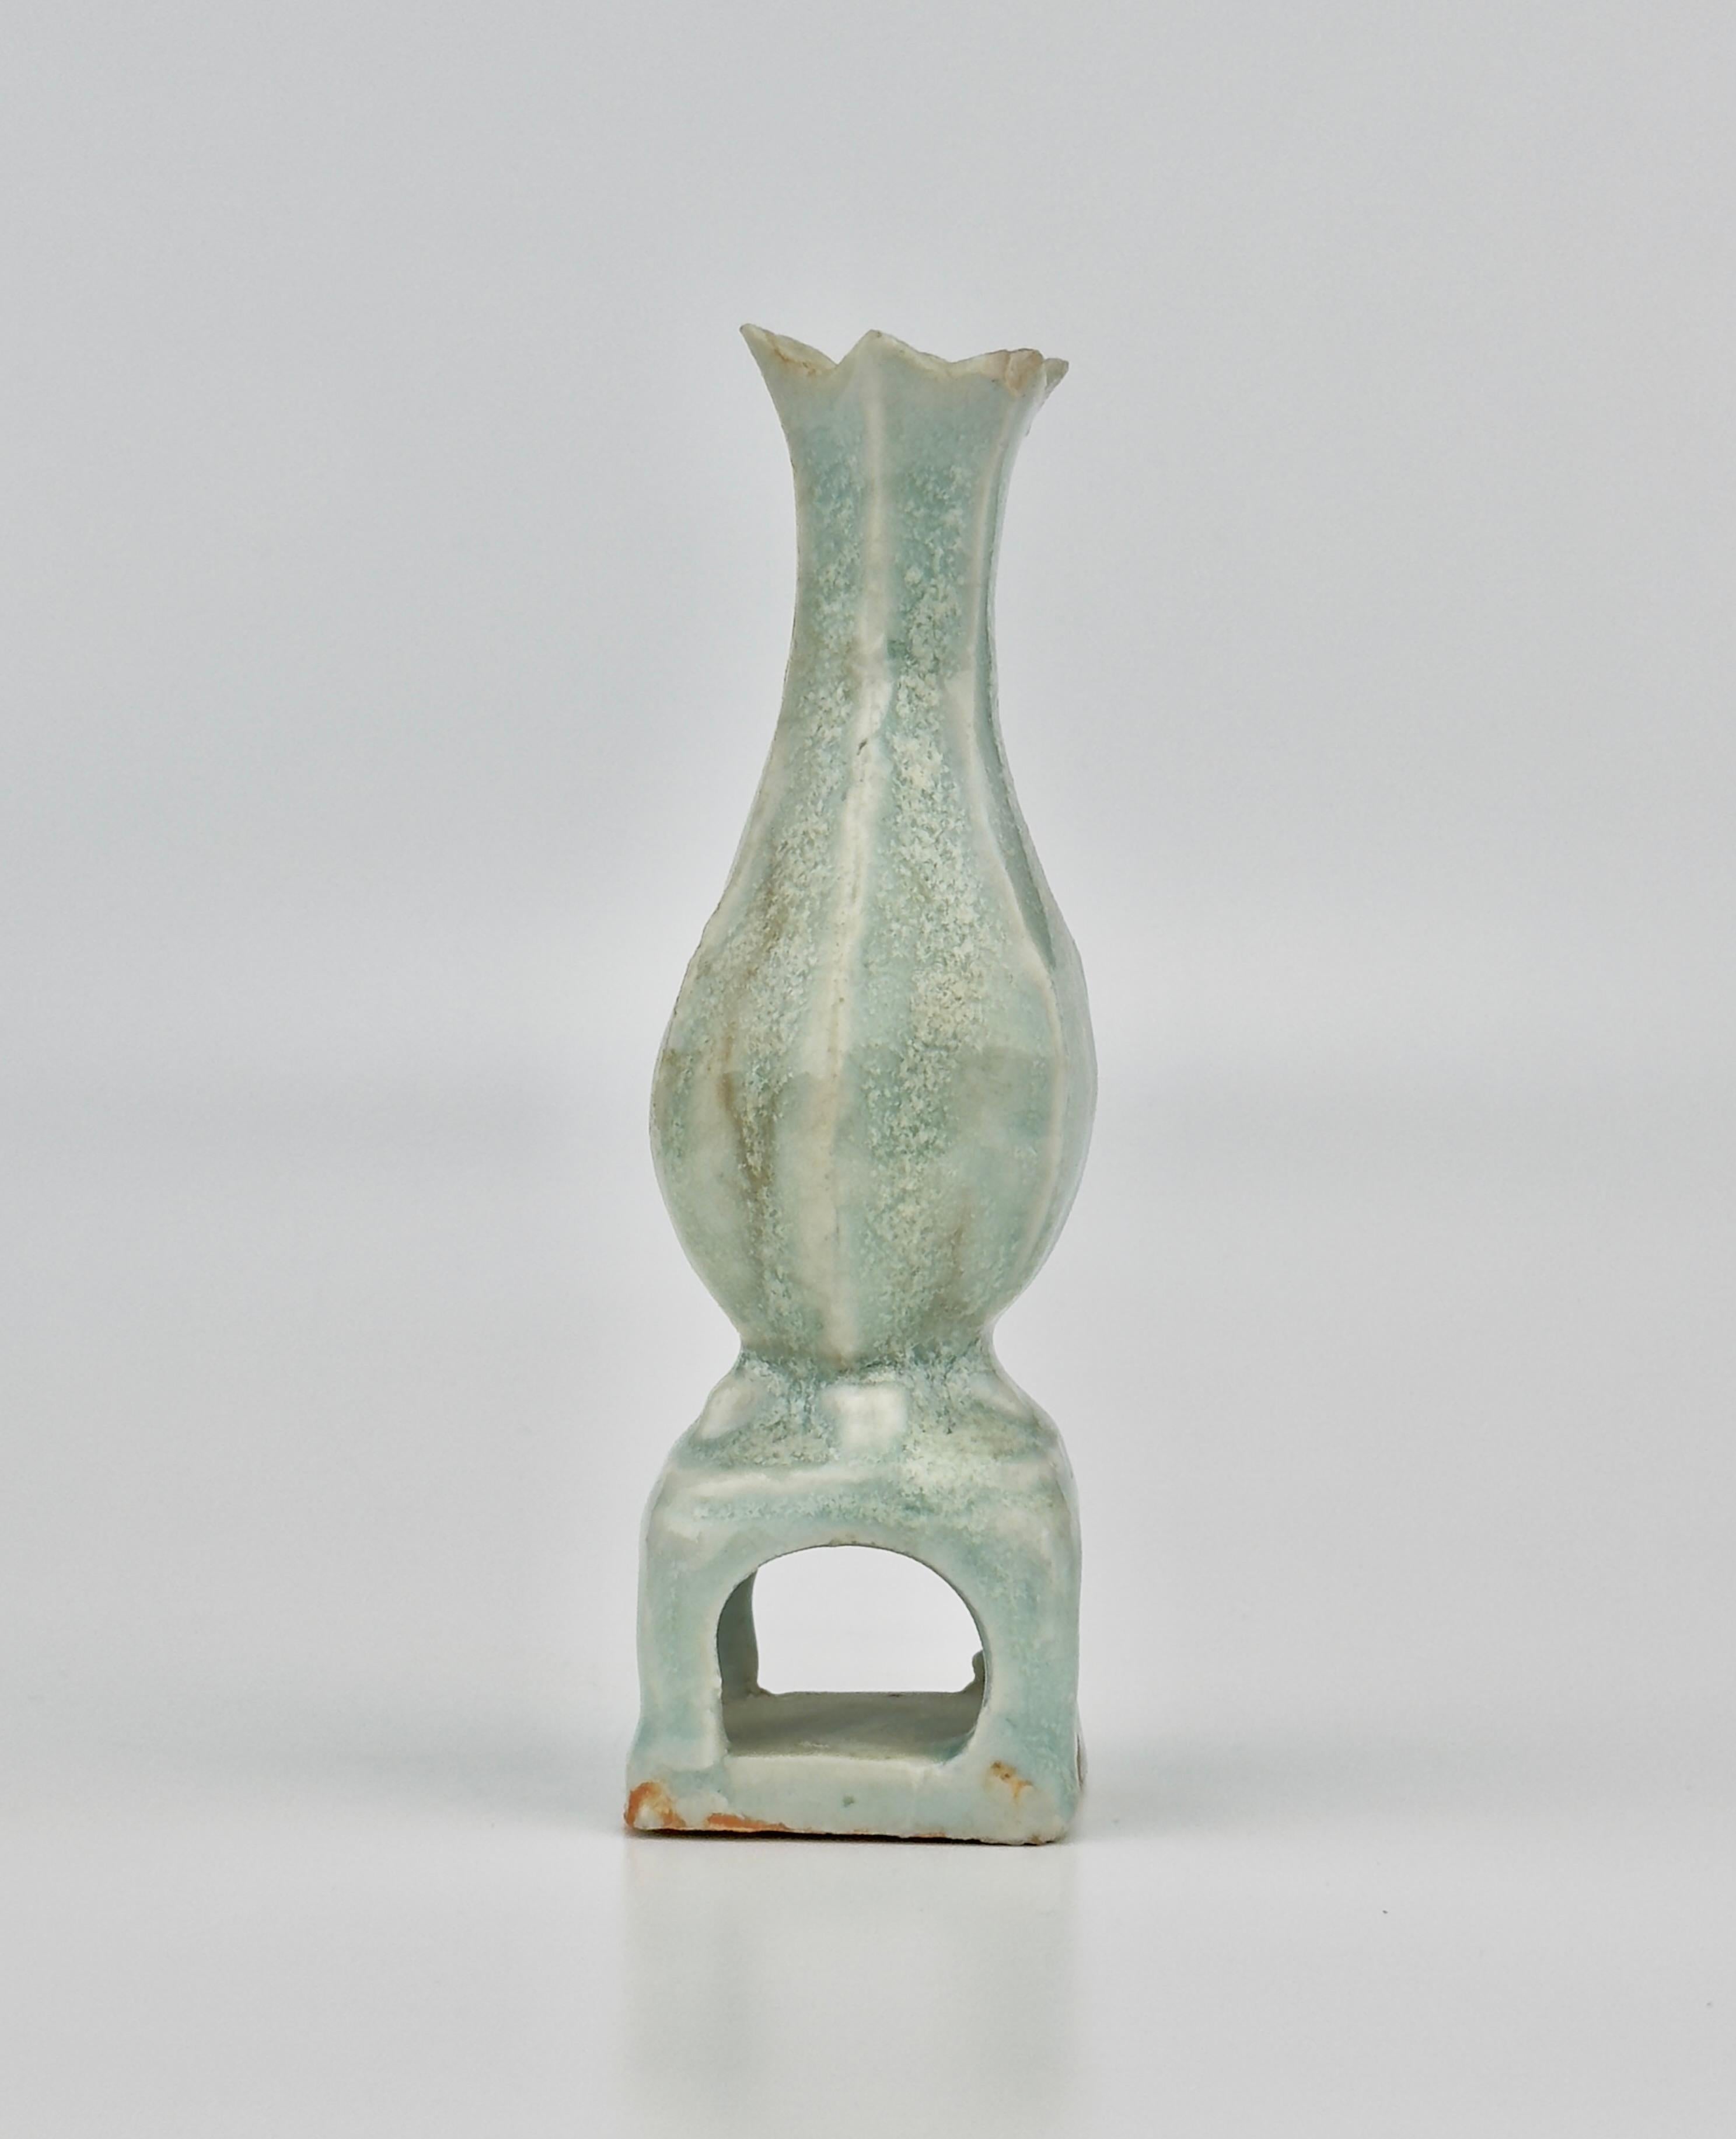 Ming Small Qingbai Pear-Shaped Vase, Song-Yuan Dynasty(13-14th century) For Sale